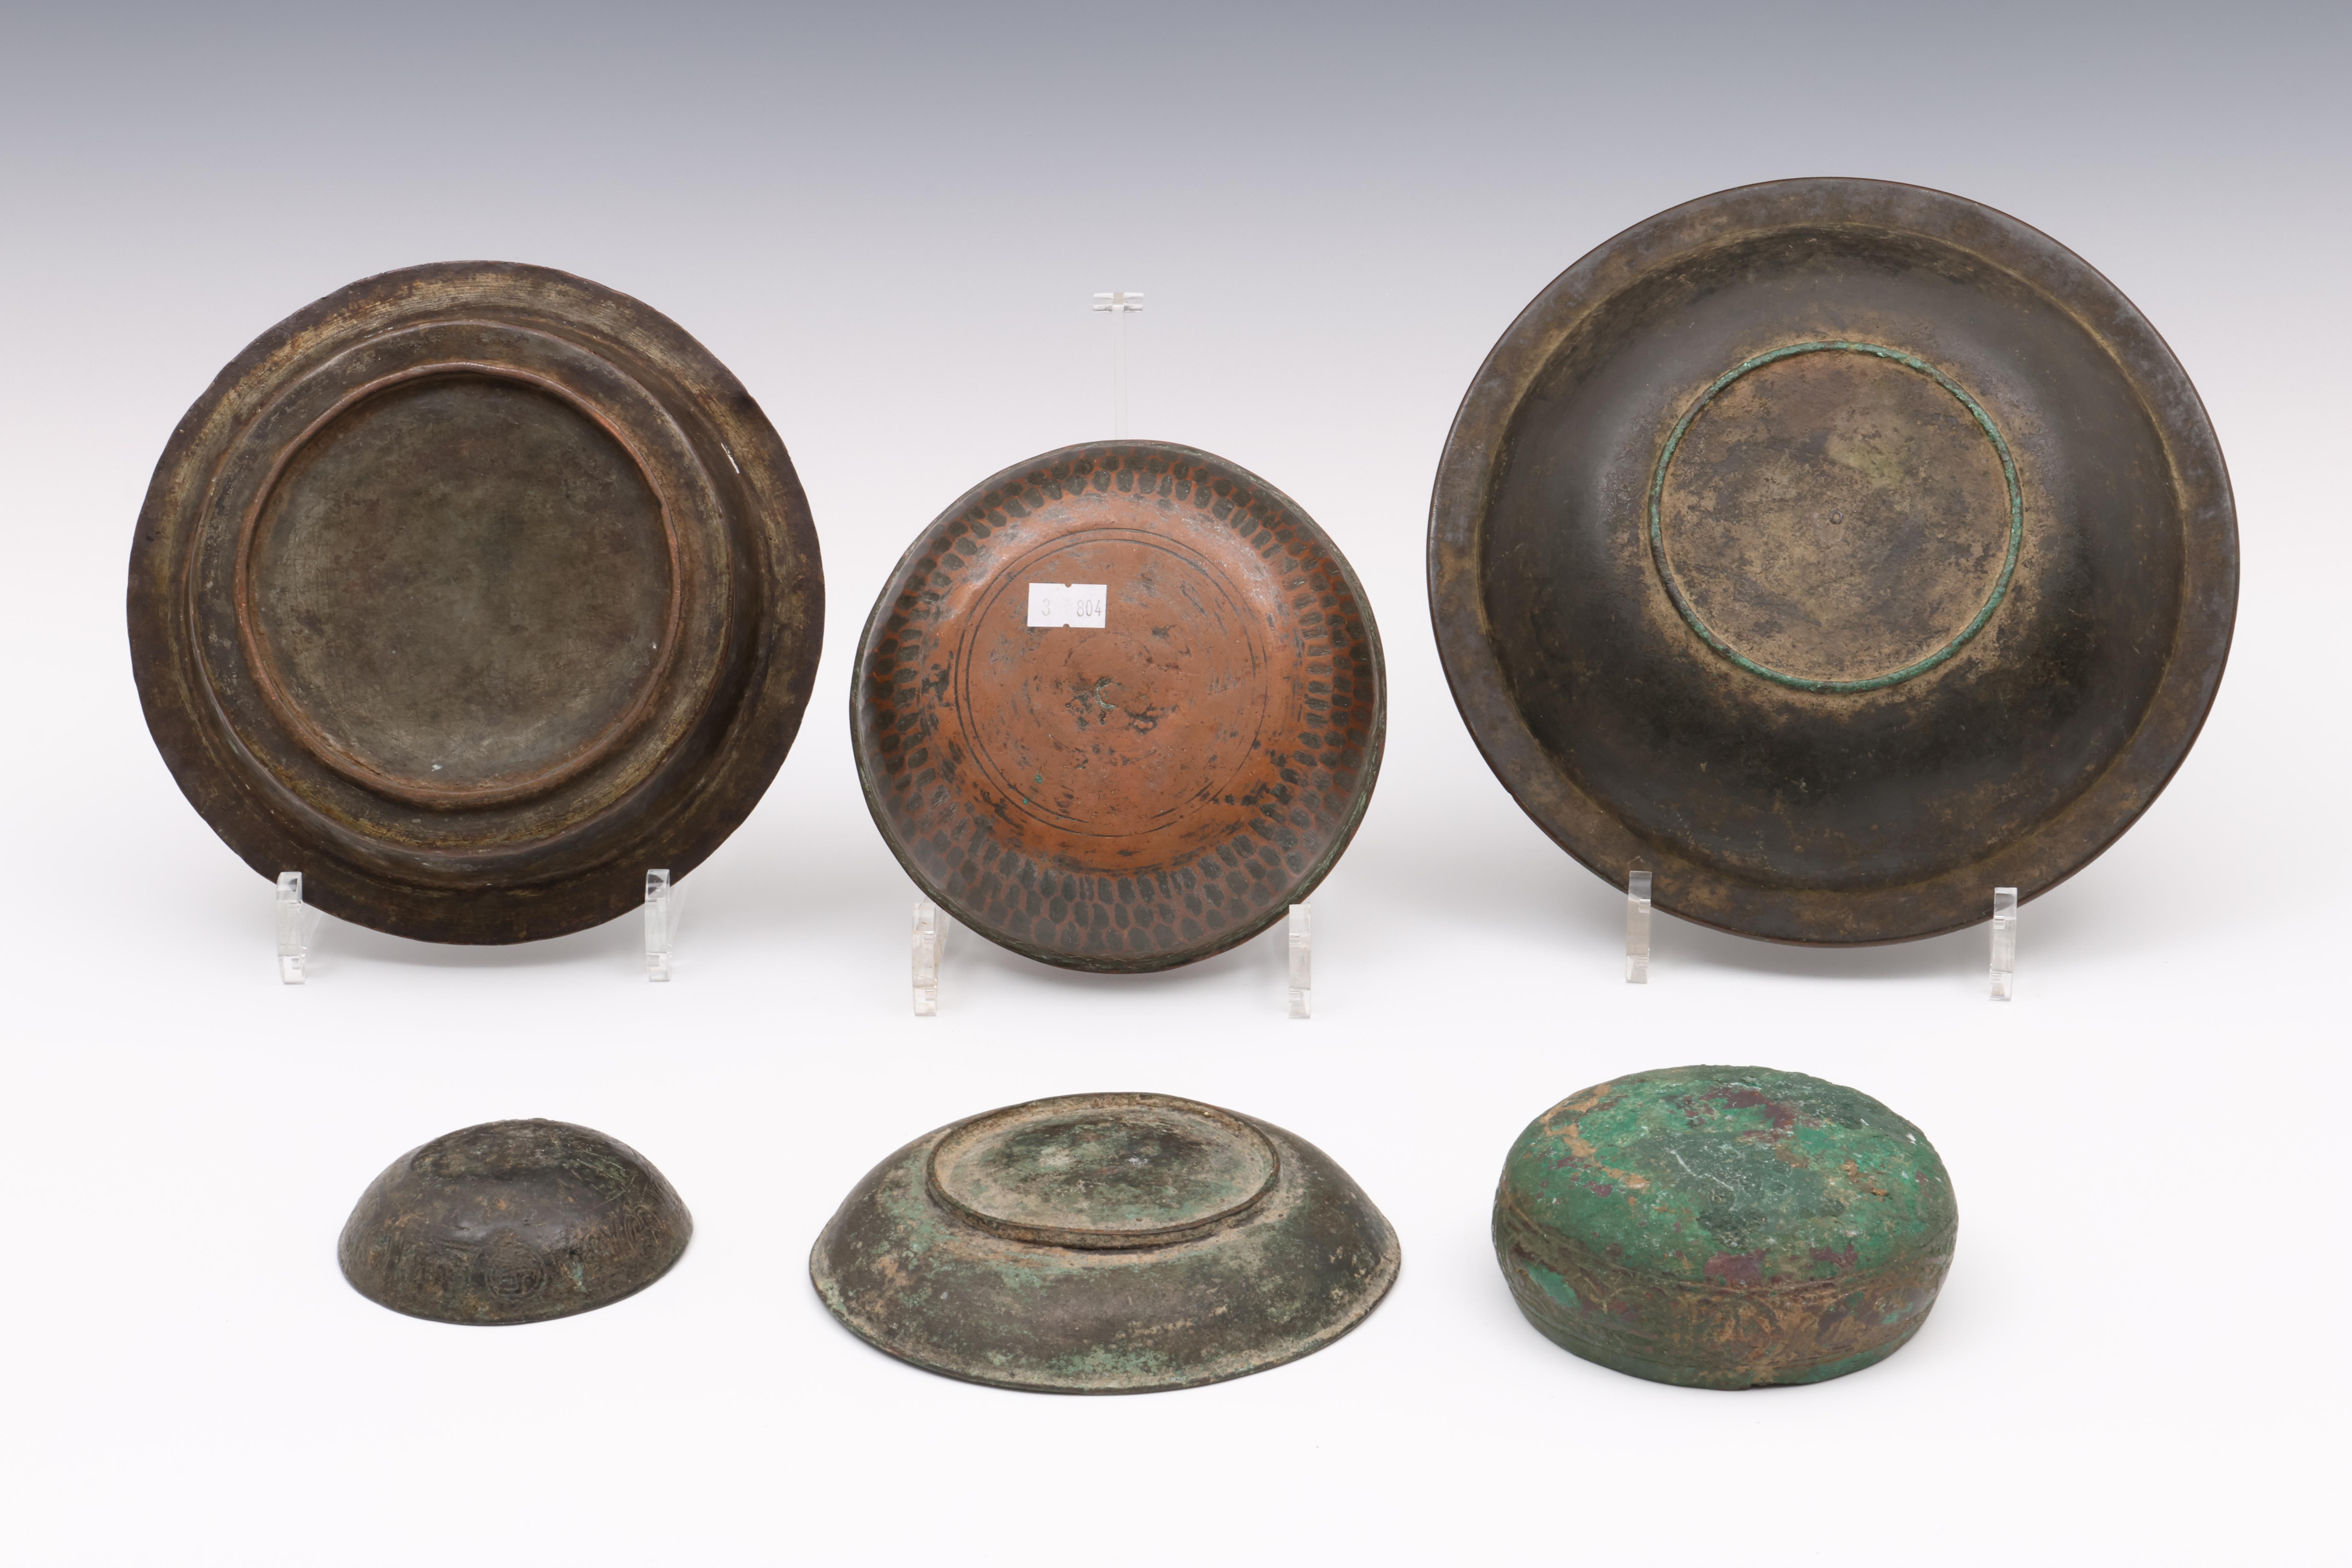 Six Persian and Ottoman bronze bowls, 11th - 17th century; - Image 4 of 5